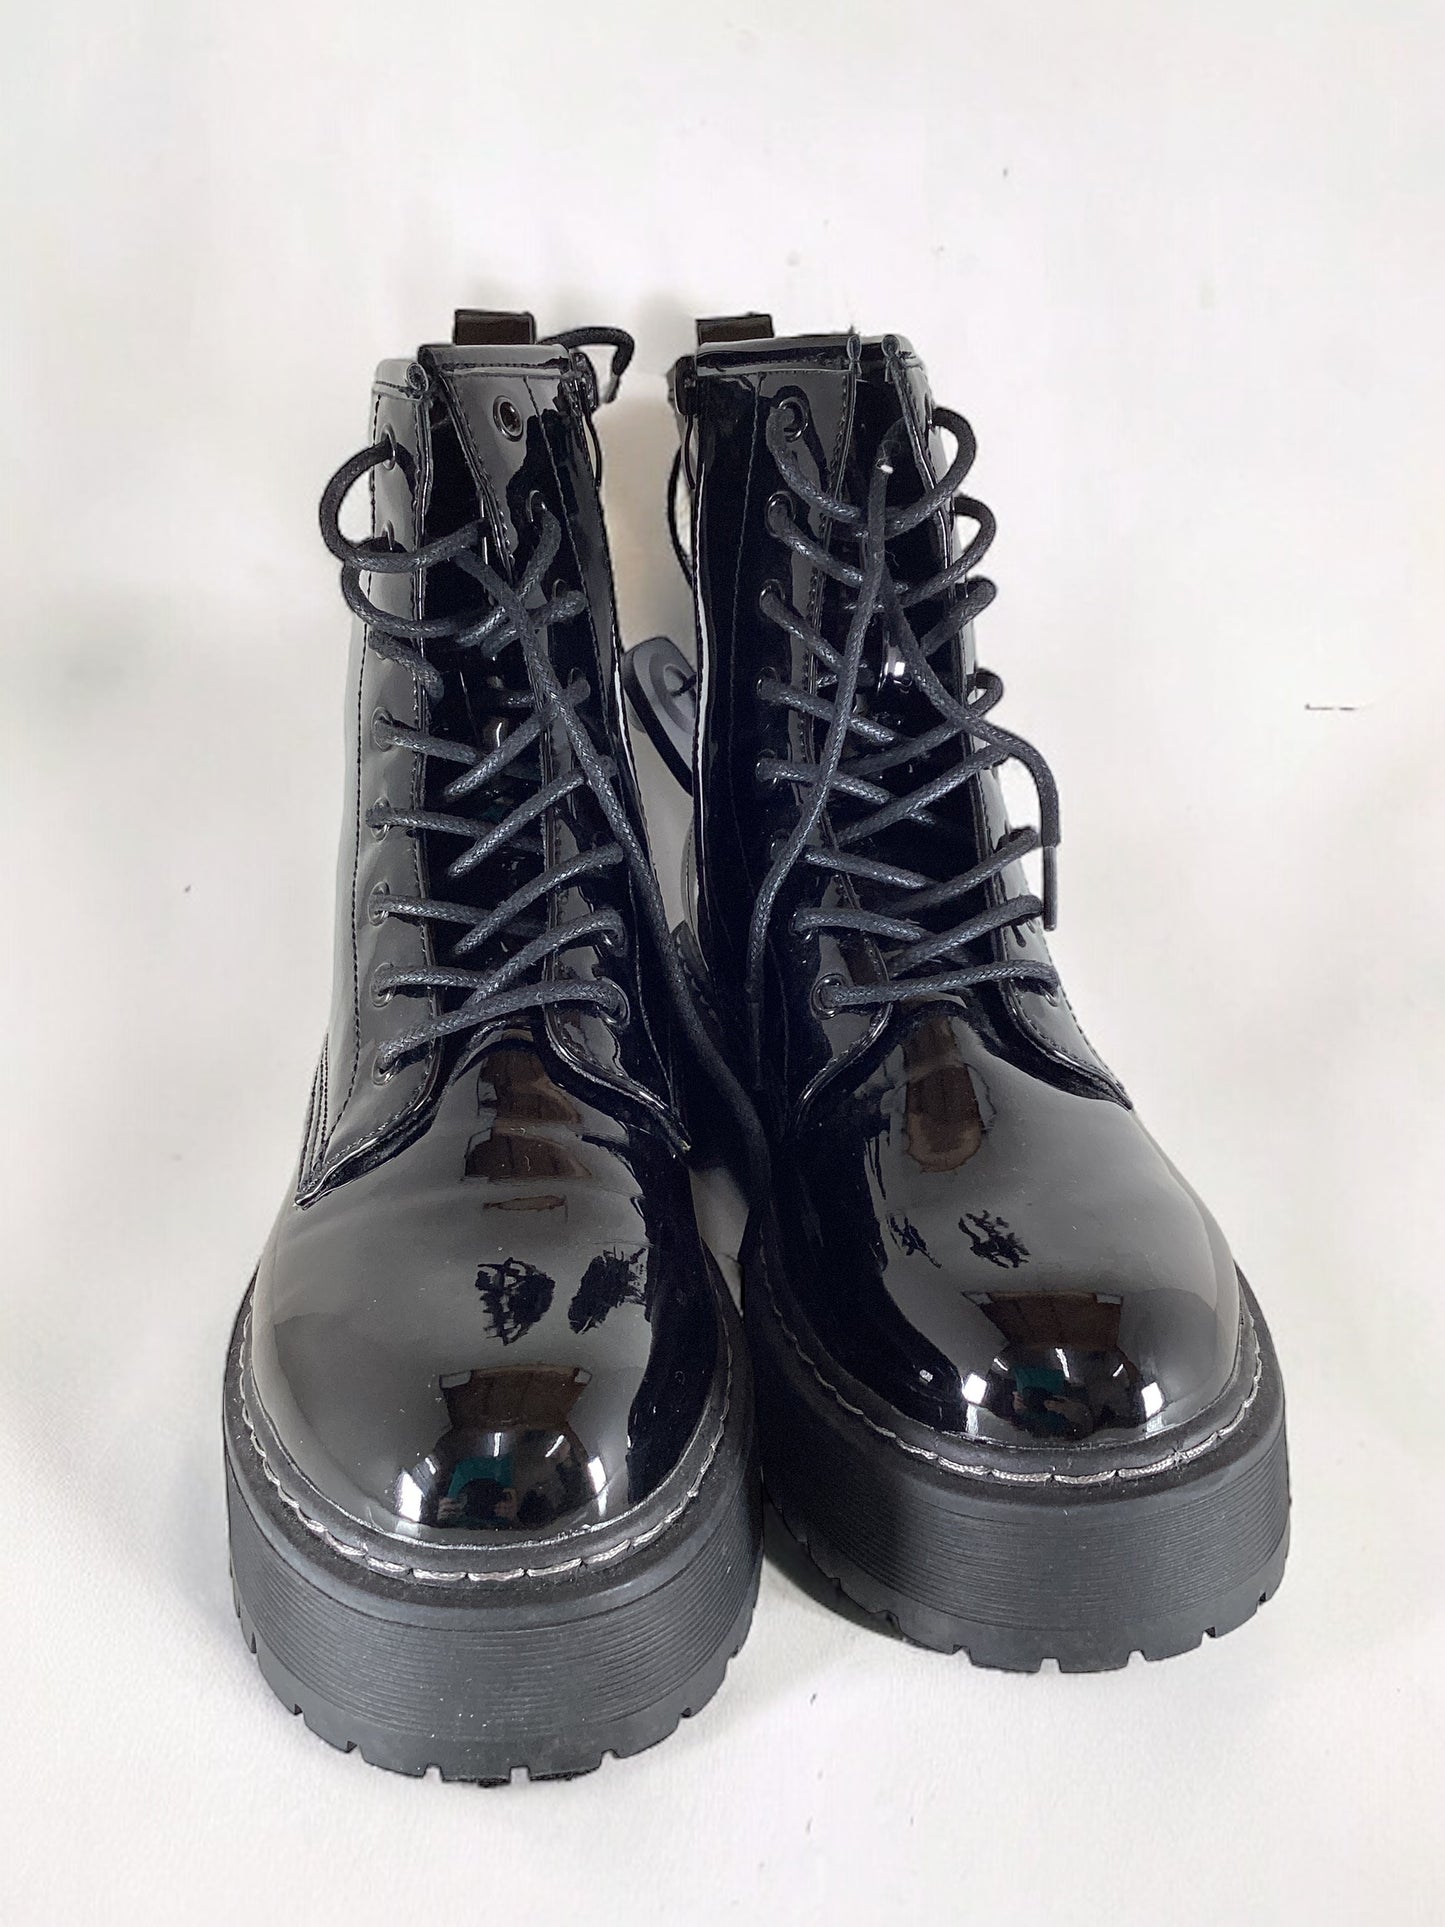 Boots Combat By Steve Madden  Size: 9